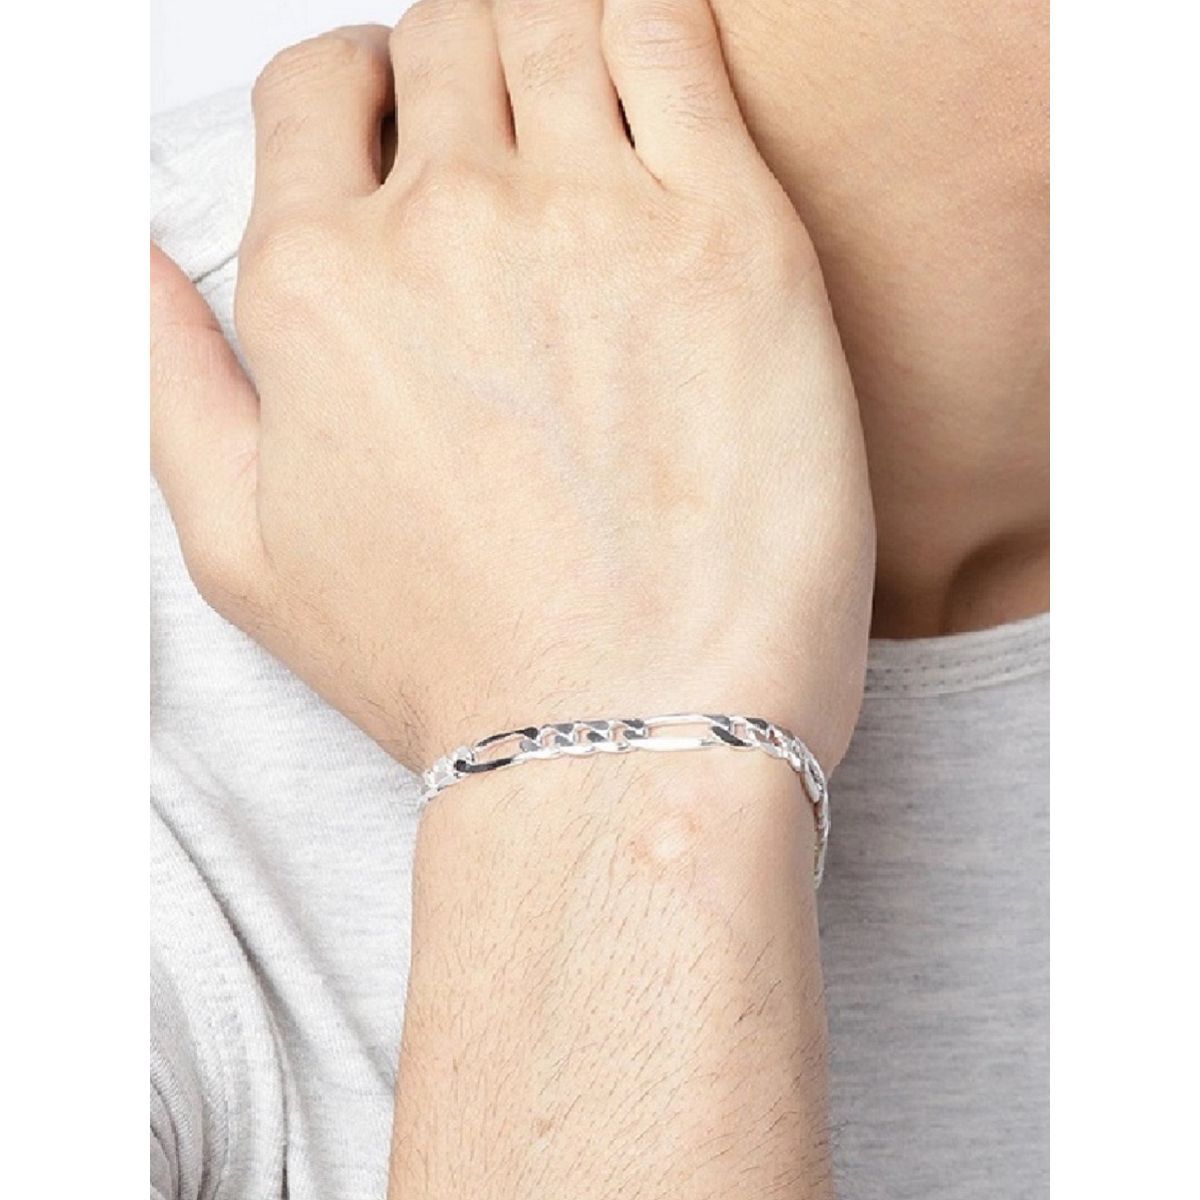 Stainless Steel Silver Hand Chain Bracelet for Men  Stylish Thick  Lose  Heavy Metal Wrist